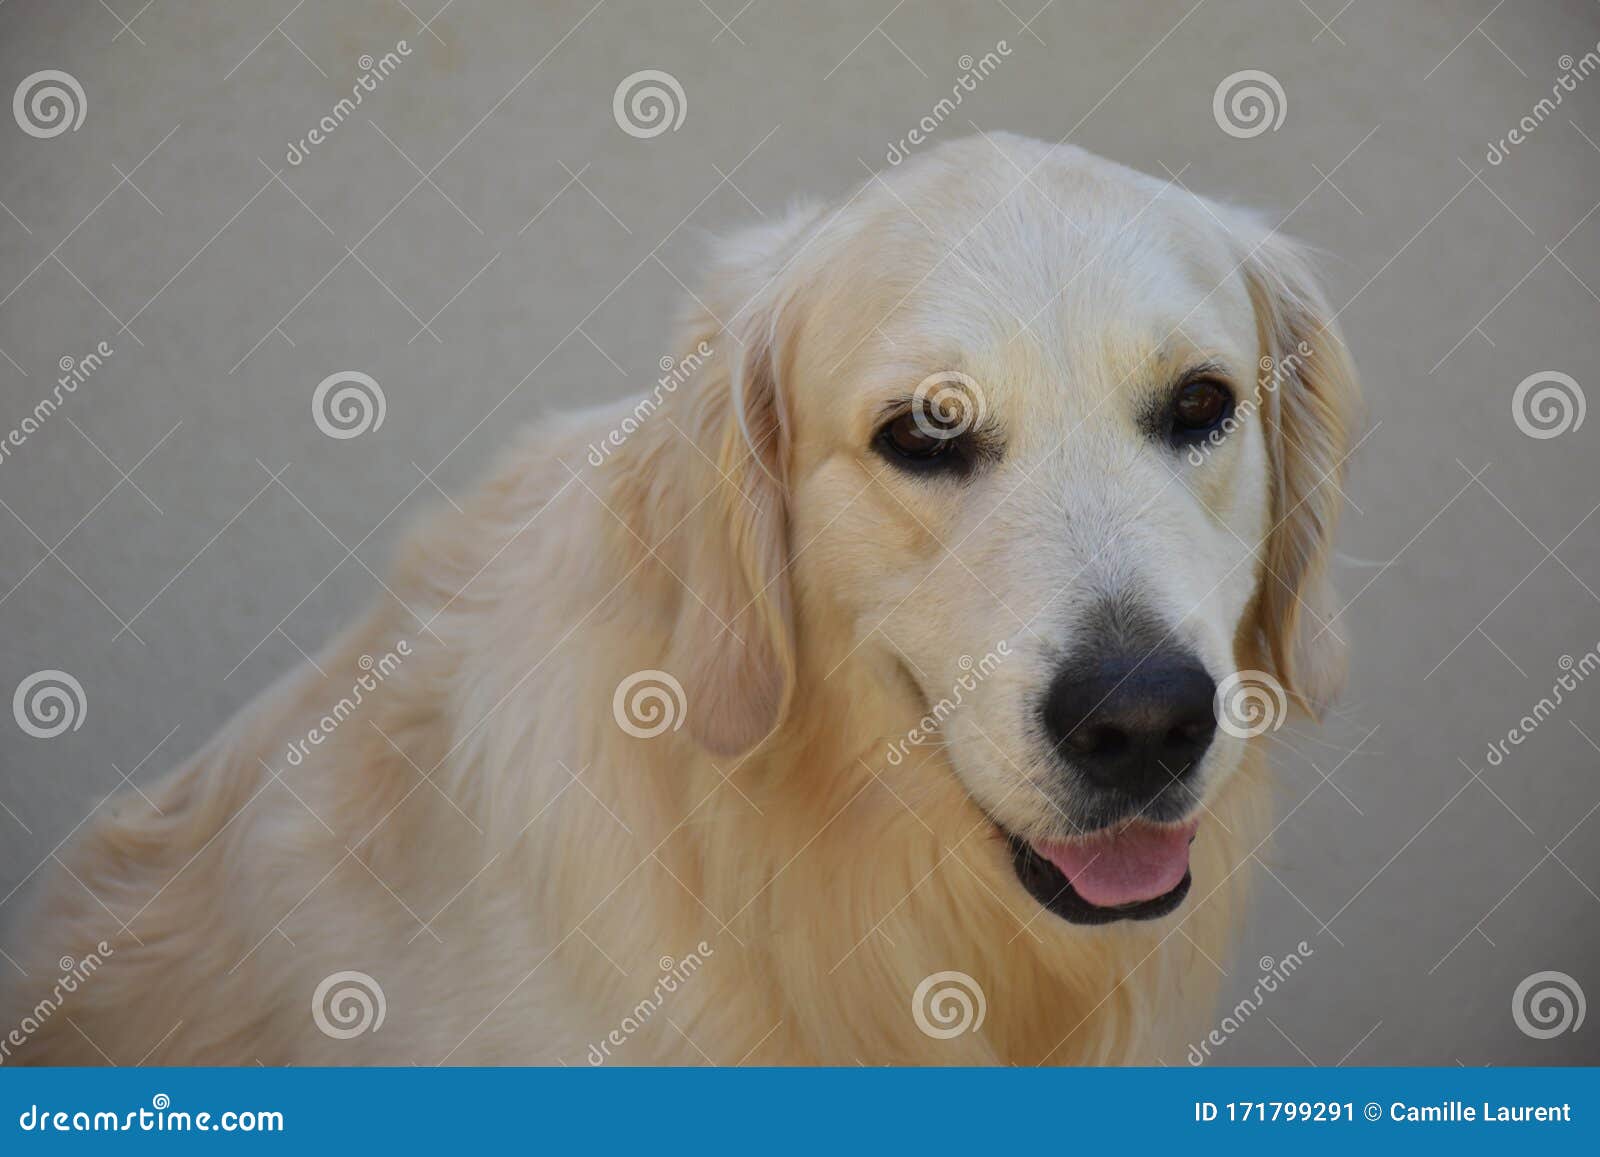 golden retriever face dog with smile, le muy, france